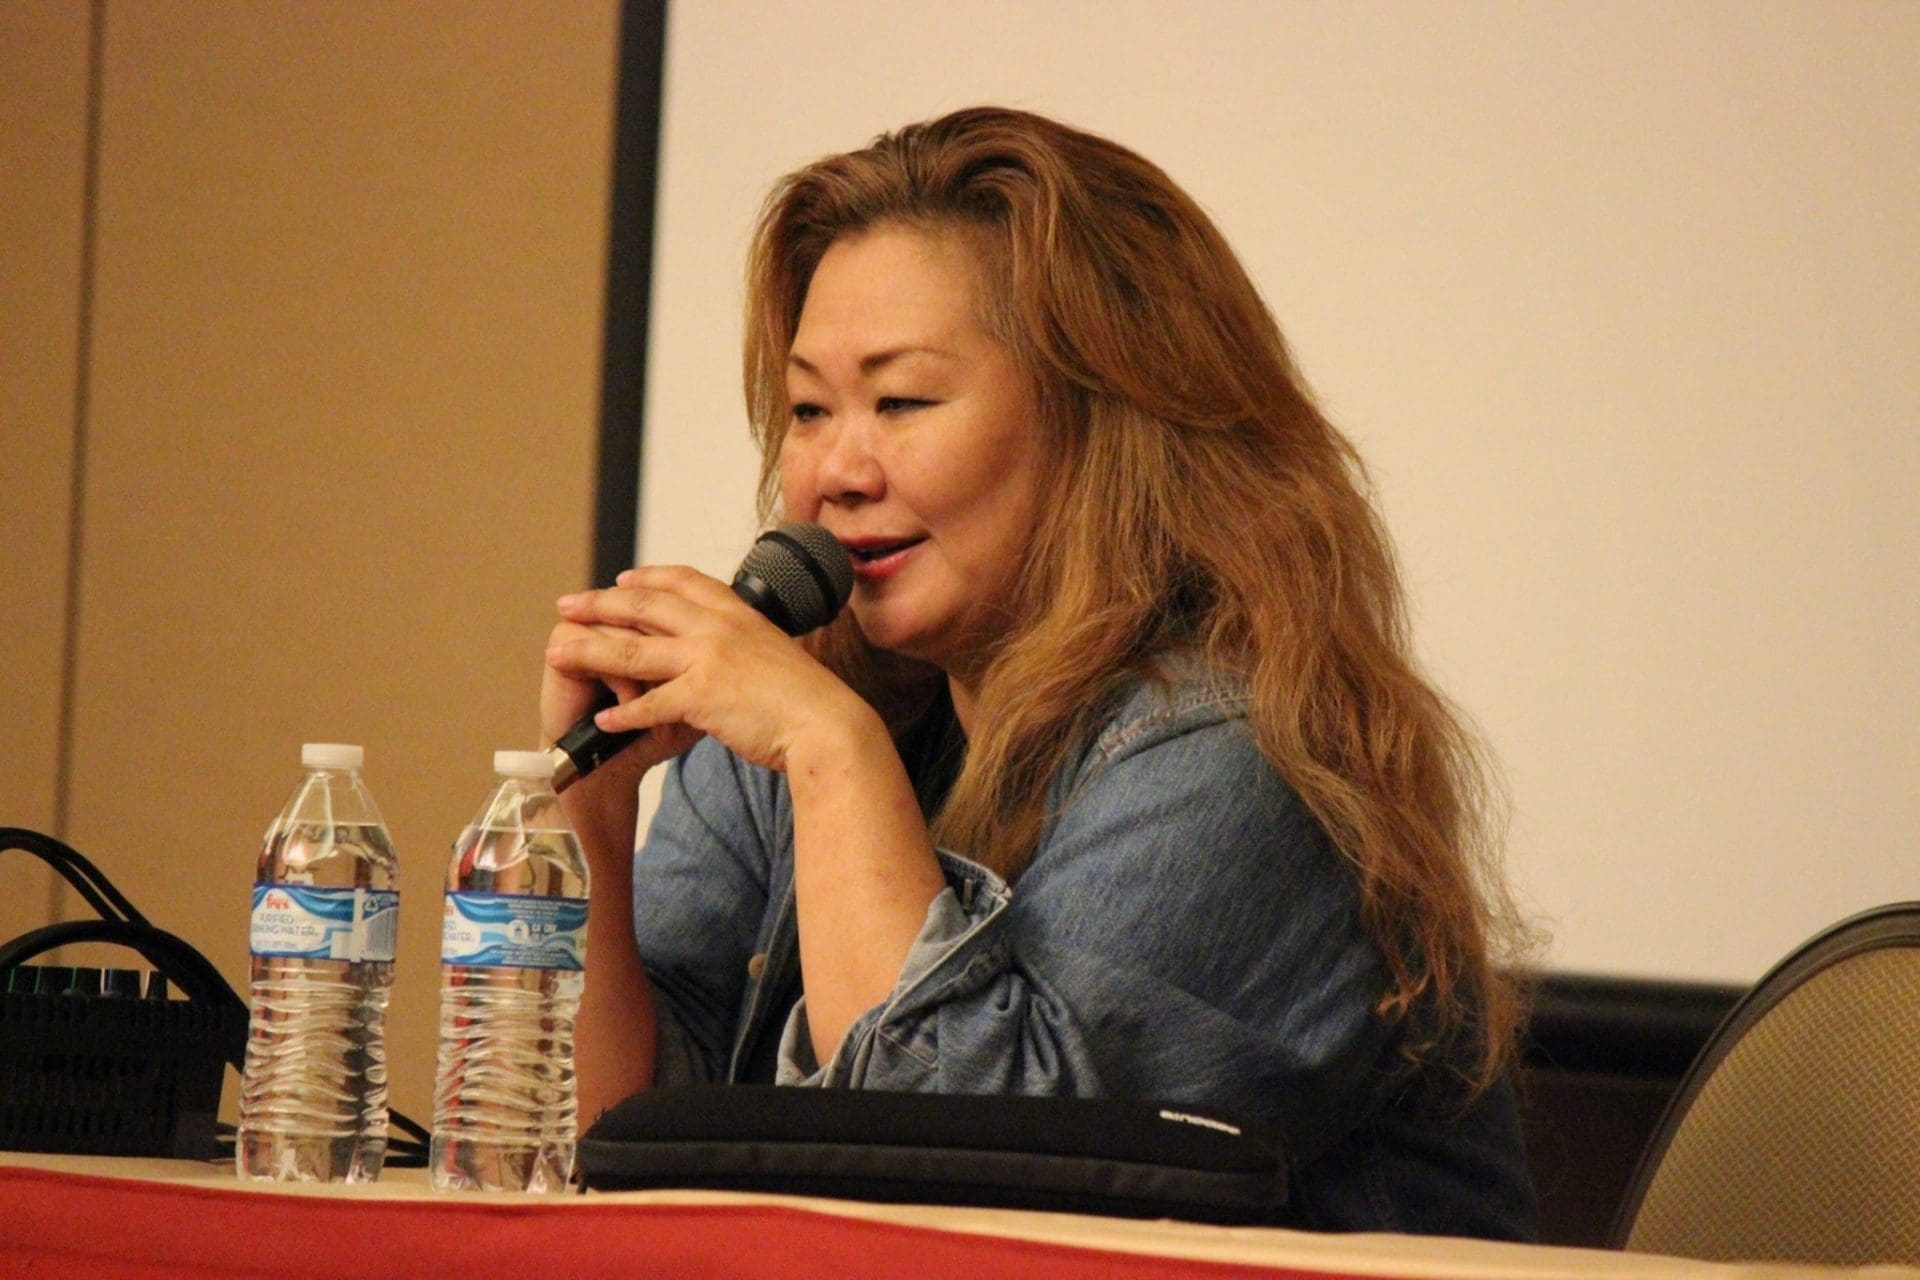 Video game composer Rika Muranaka during her solo panel at Saboten Con 2015.